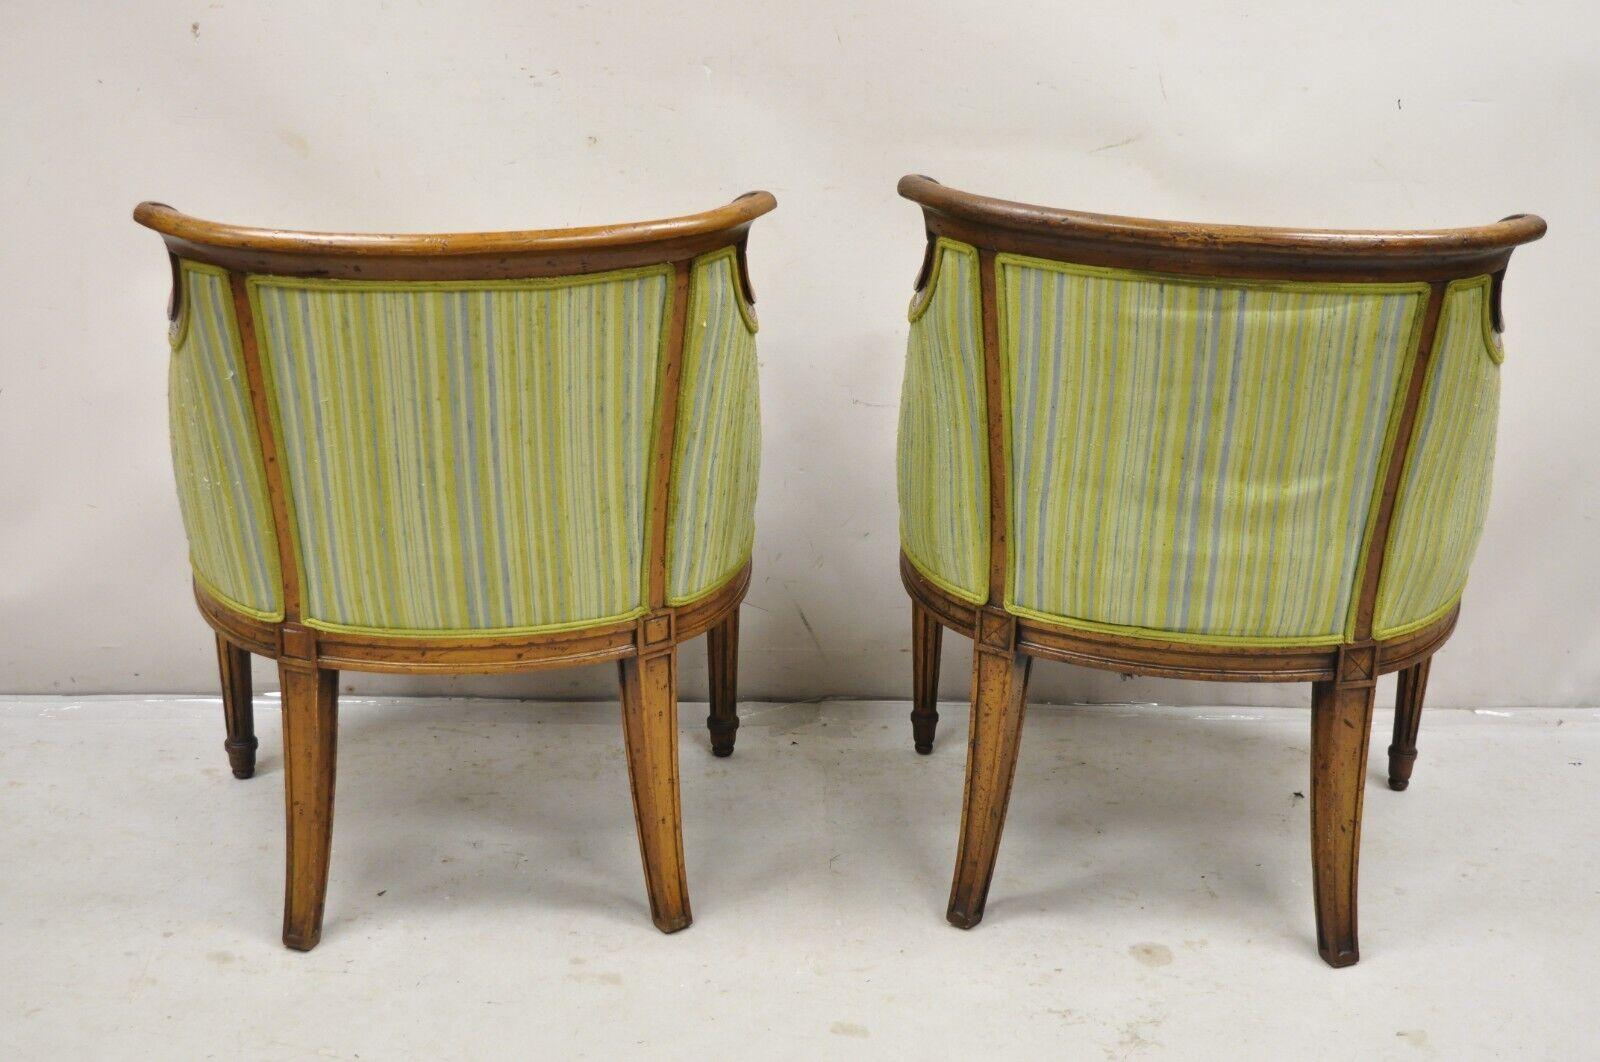 Antique Italian Regency Distressed Carved Walnut Barrel Back Club Chairs - Pair For Sale 6